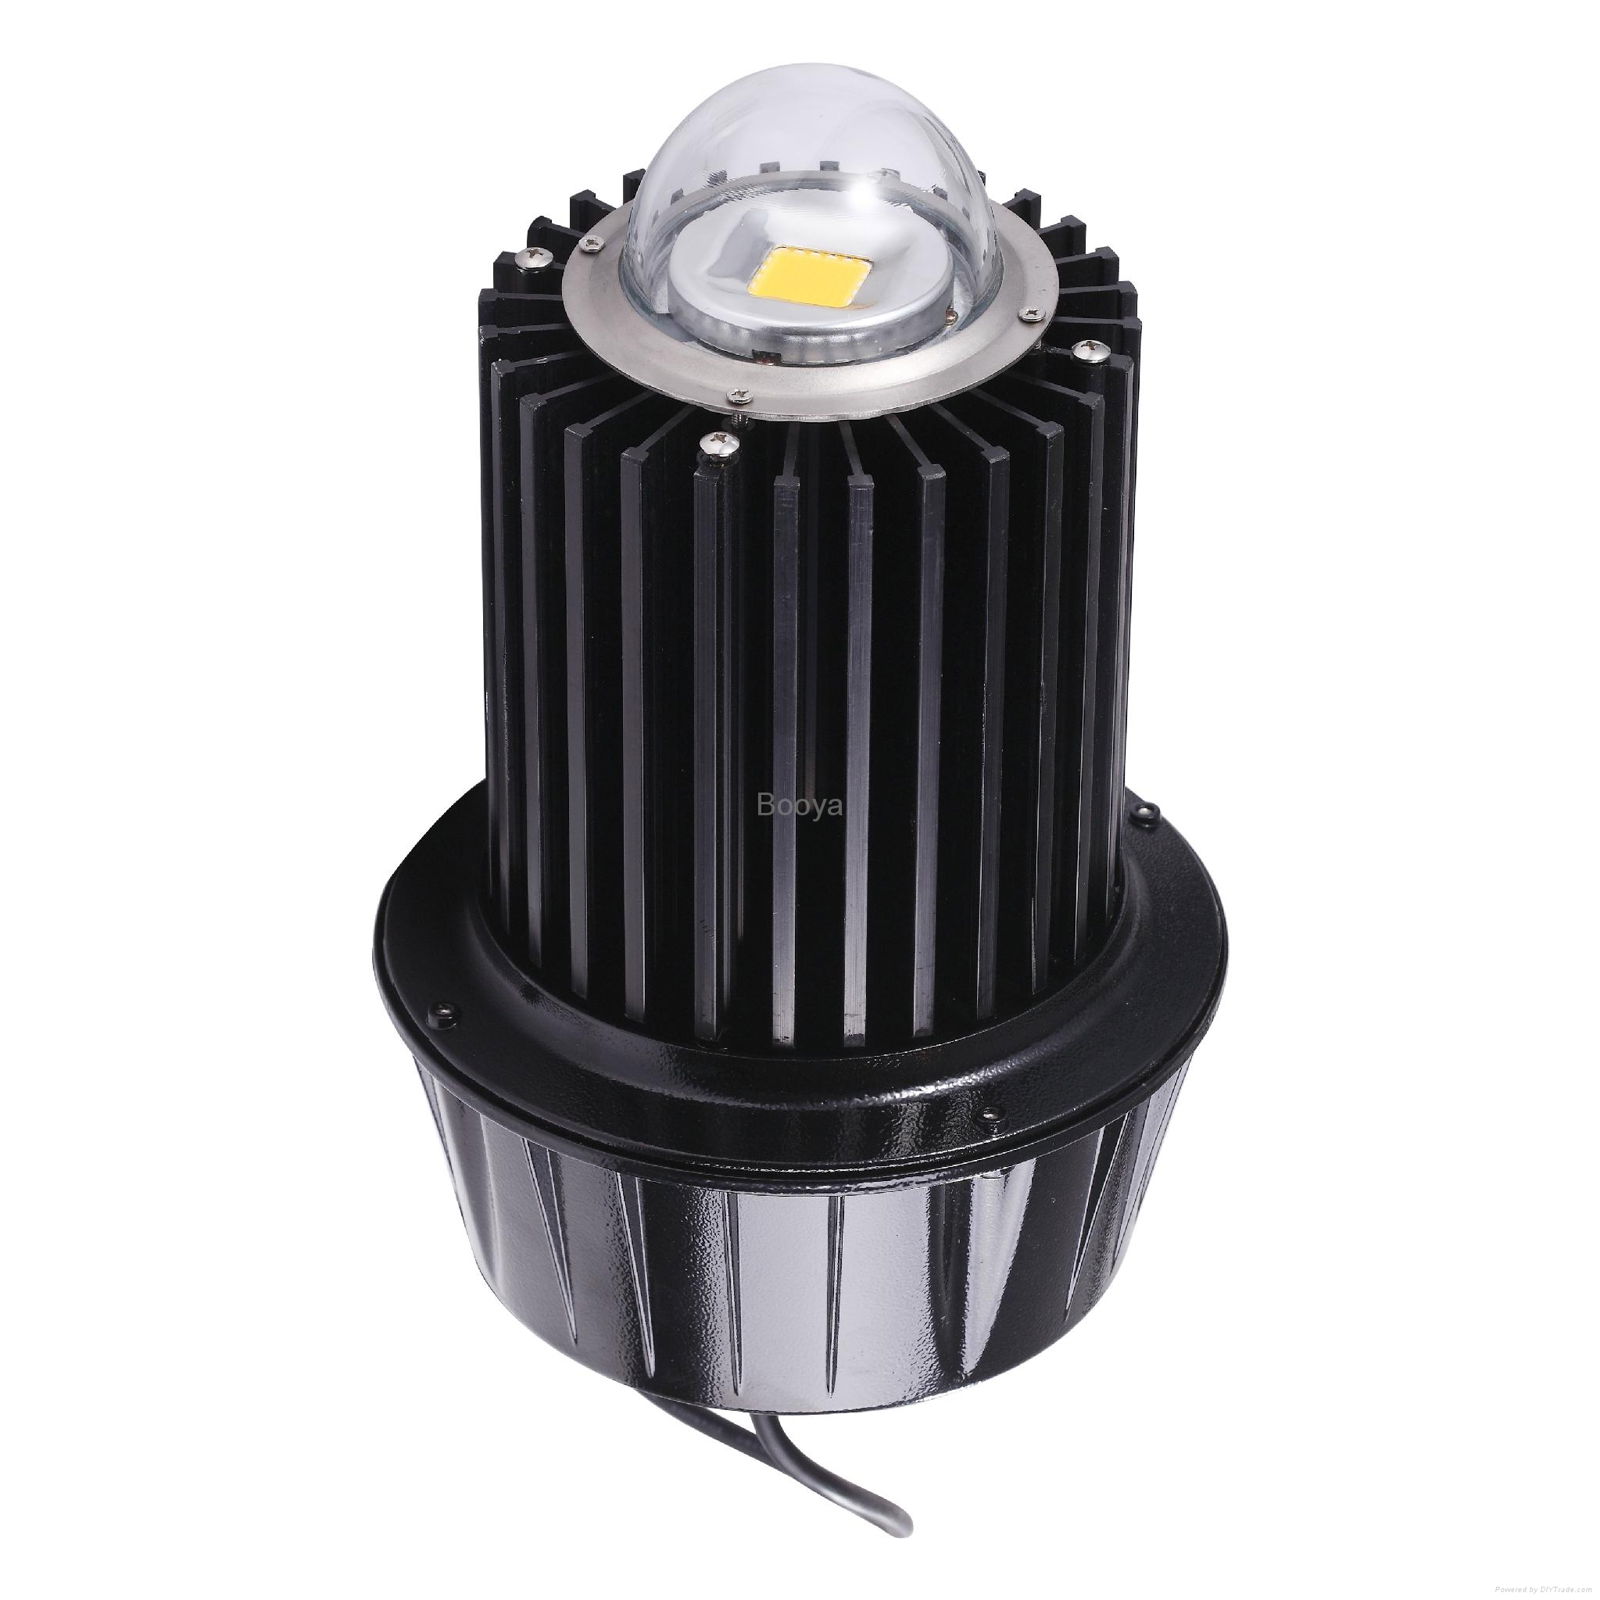 LED high bay lights hot sale 120W  COB with 90lm/W efficiency CE & Rohs mark 2